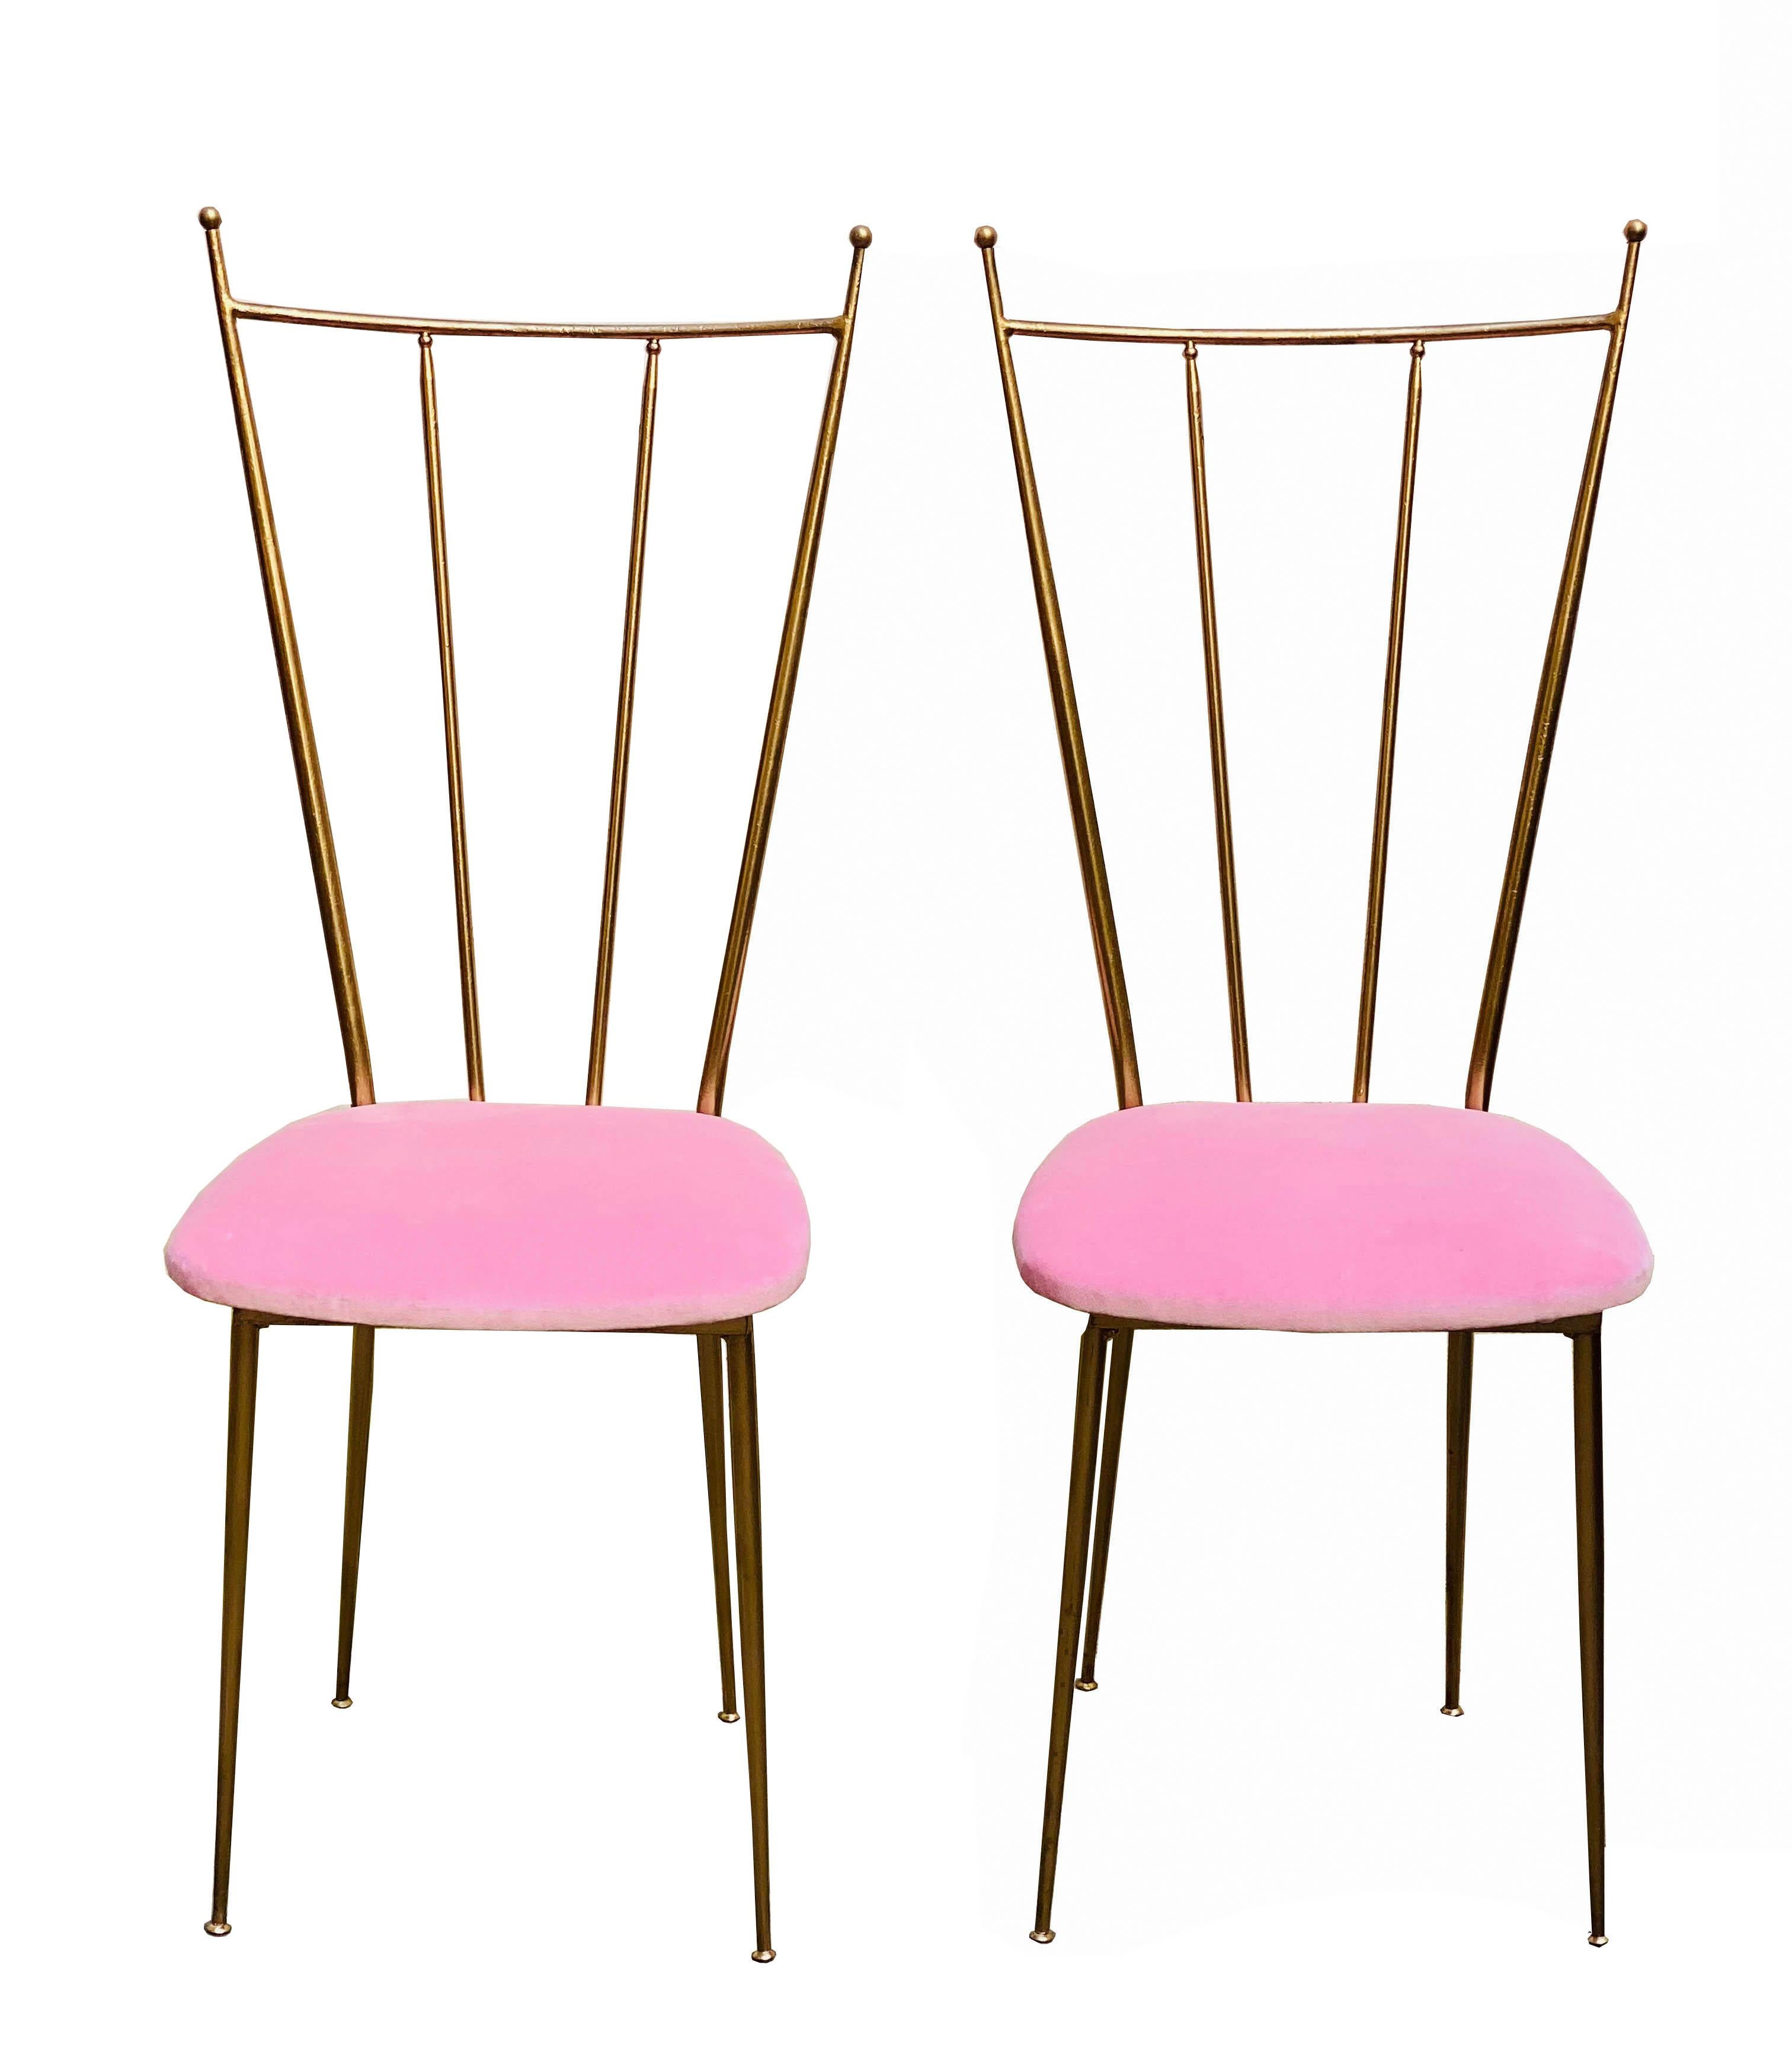 Pair of beautiful and decorative 1950s Chiavarina Chairs, in gilded brass, Italian design. The seats are upholstered with a soft pink raw silk velvet.